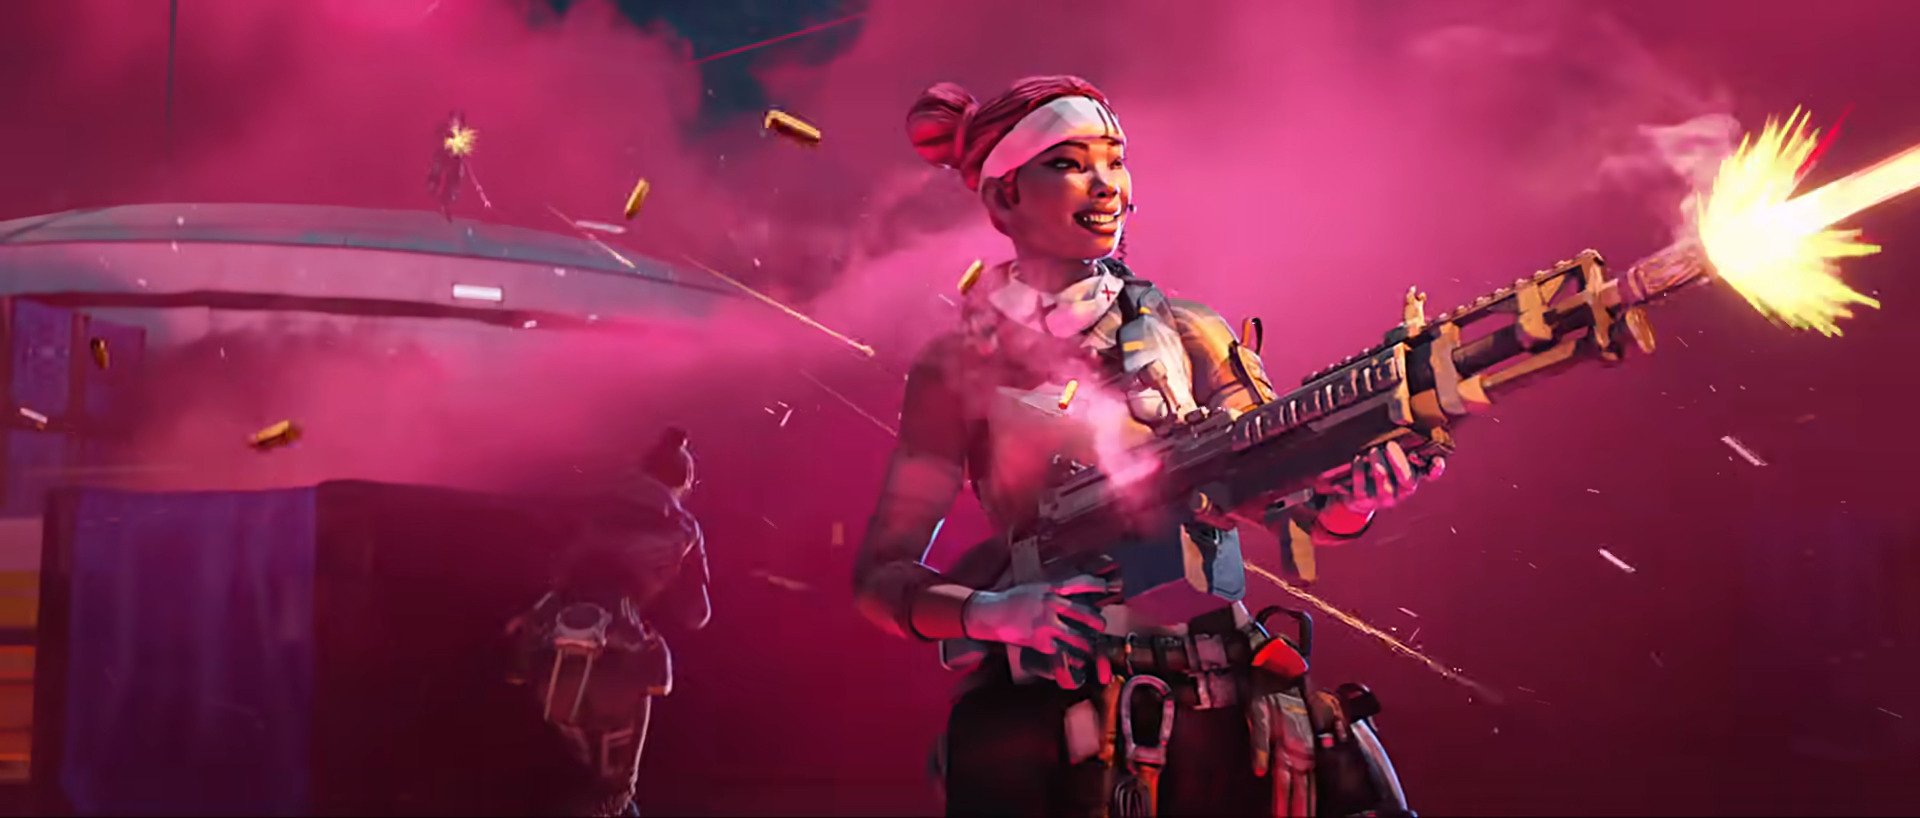 Horizon Is The Next Legend In Apex Legends, Arriving In Season 7 – Here’s Everything You Need To Know